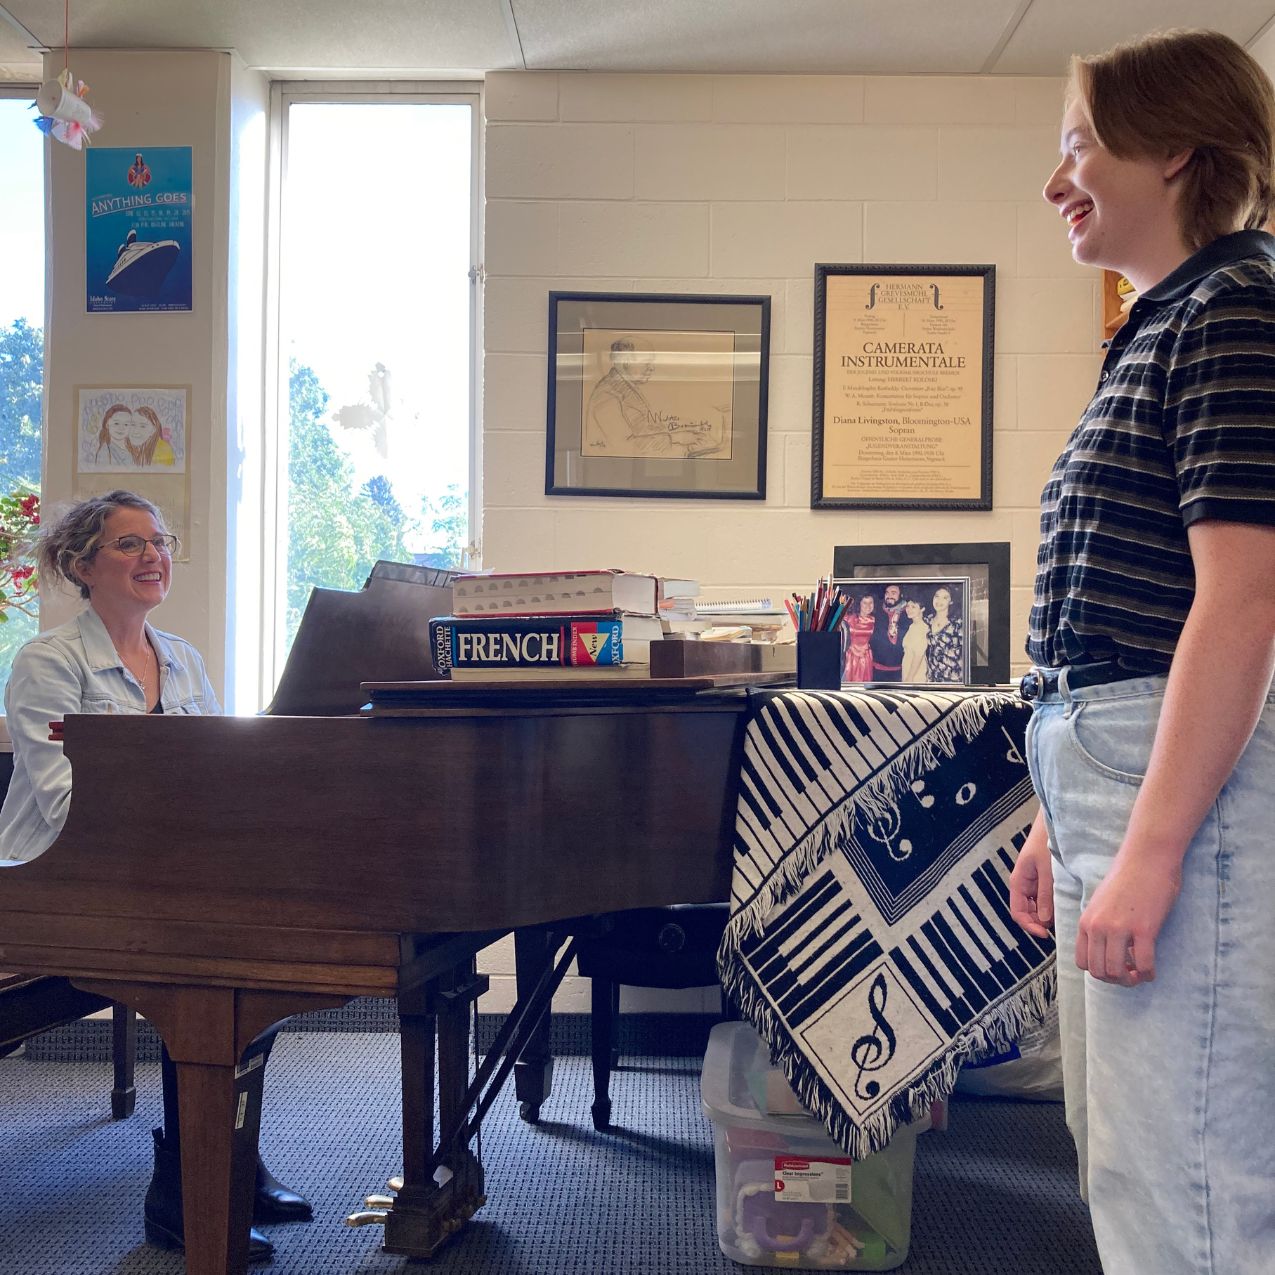 Professor of voice, Diana Livingston Friedley sits at the piano smiling up at her voice student, who is standing next to the piano. They are in a small studio space.